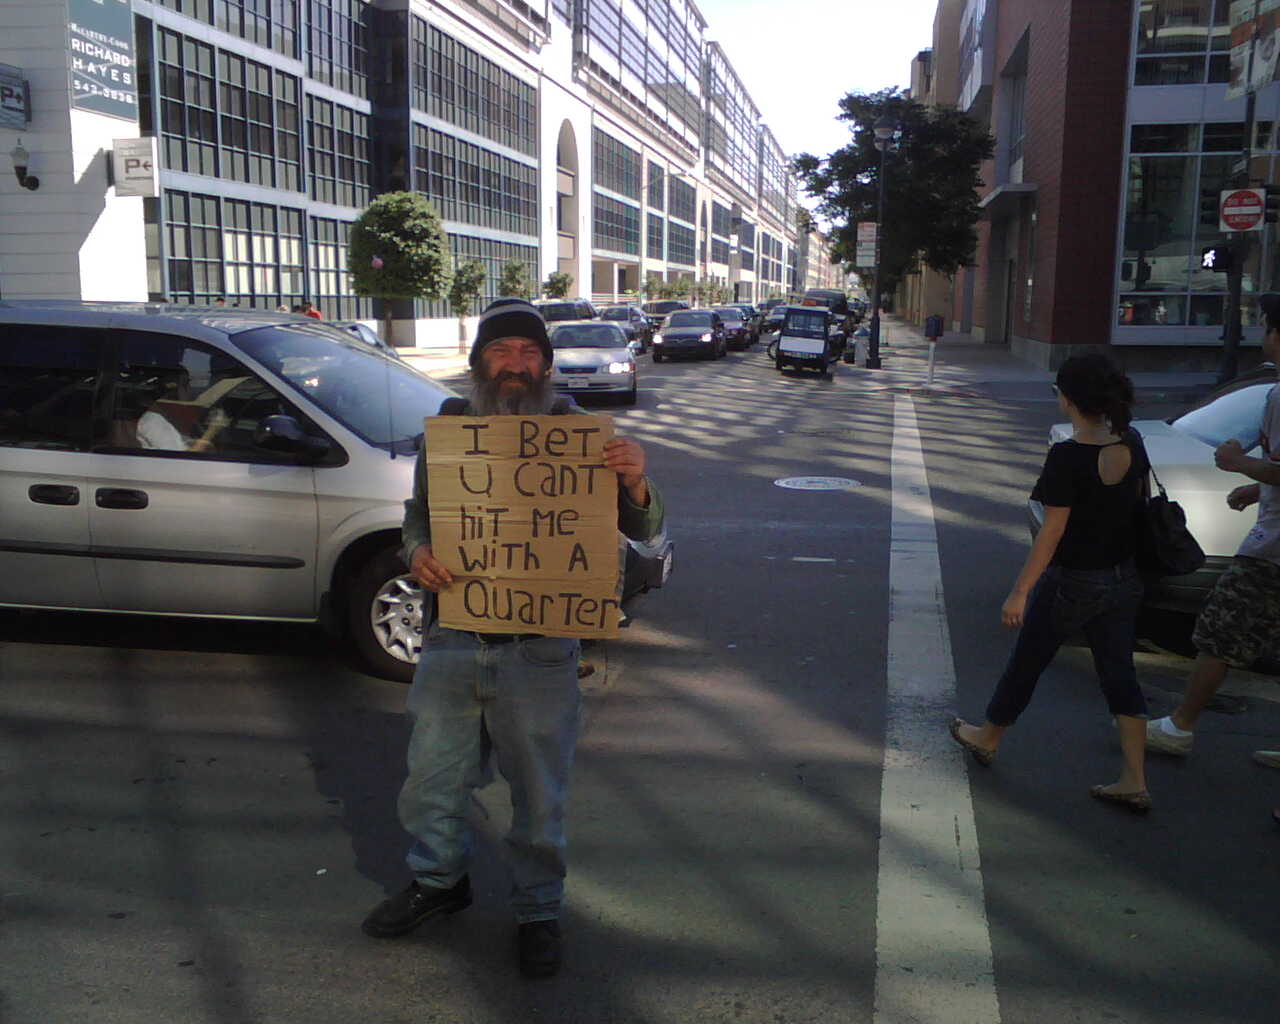 I ran into this crazy bum in San Fran, shows how desperate some are for money!